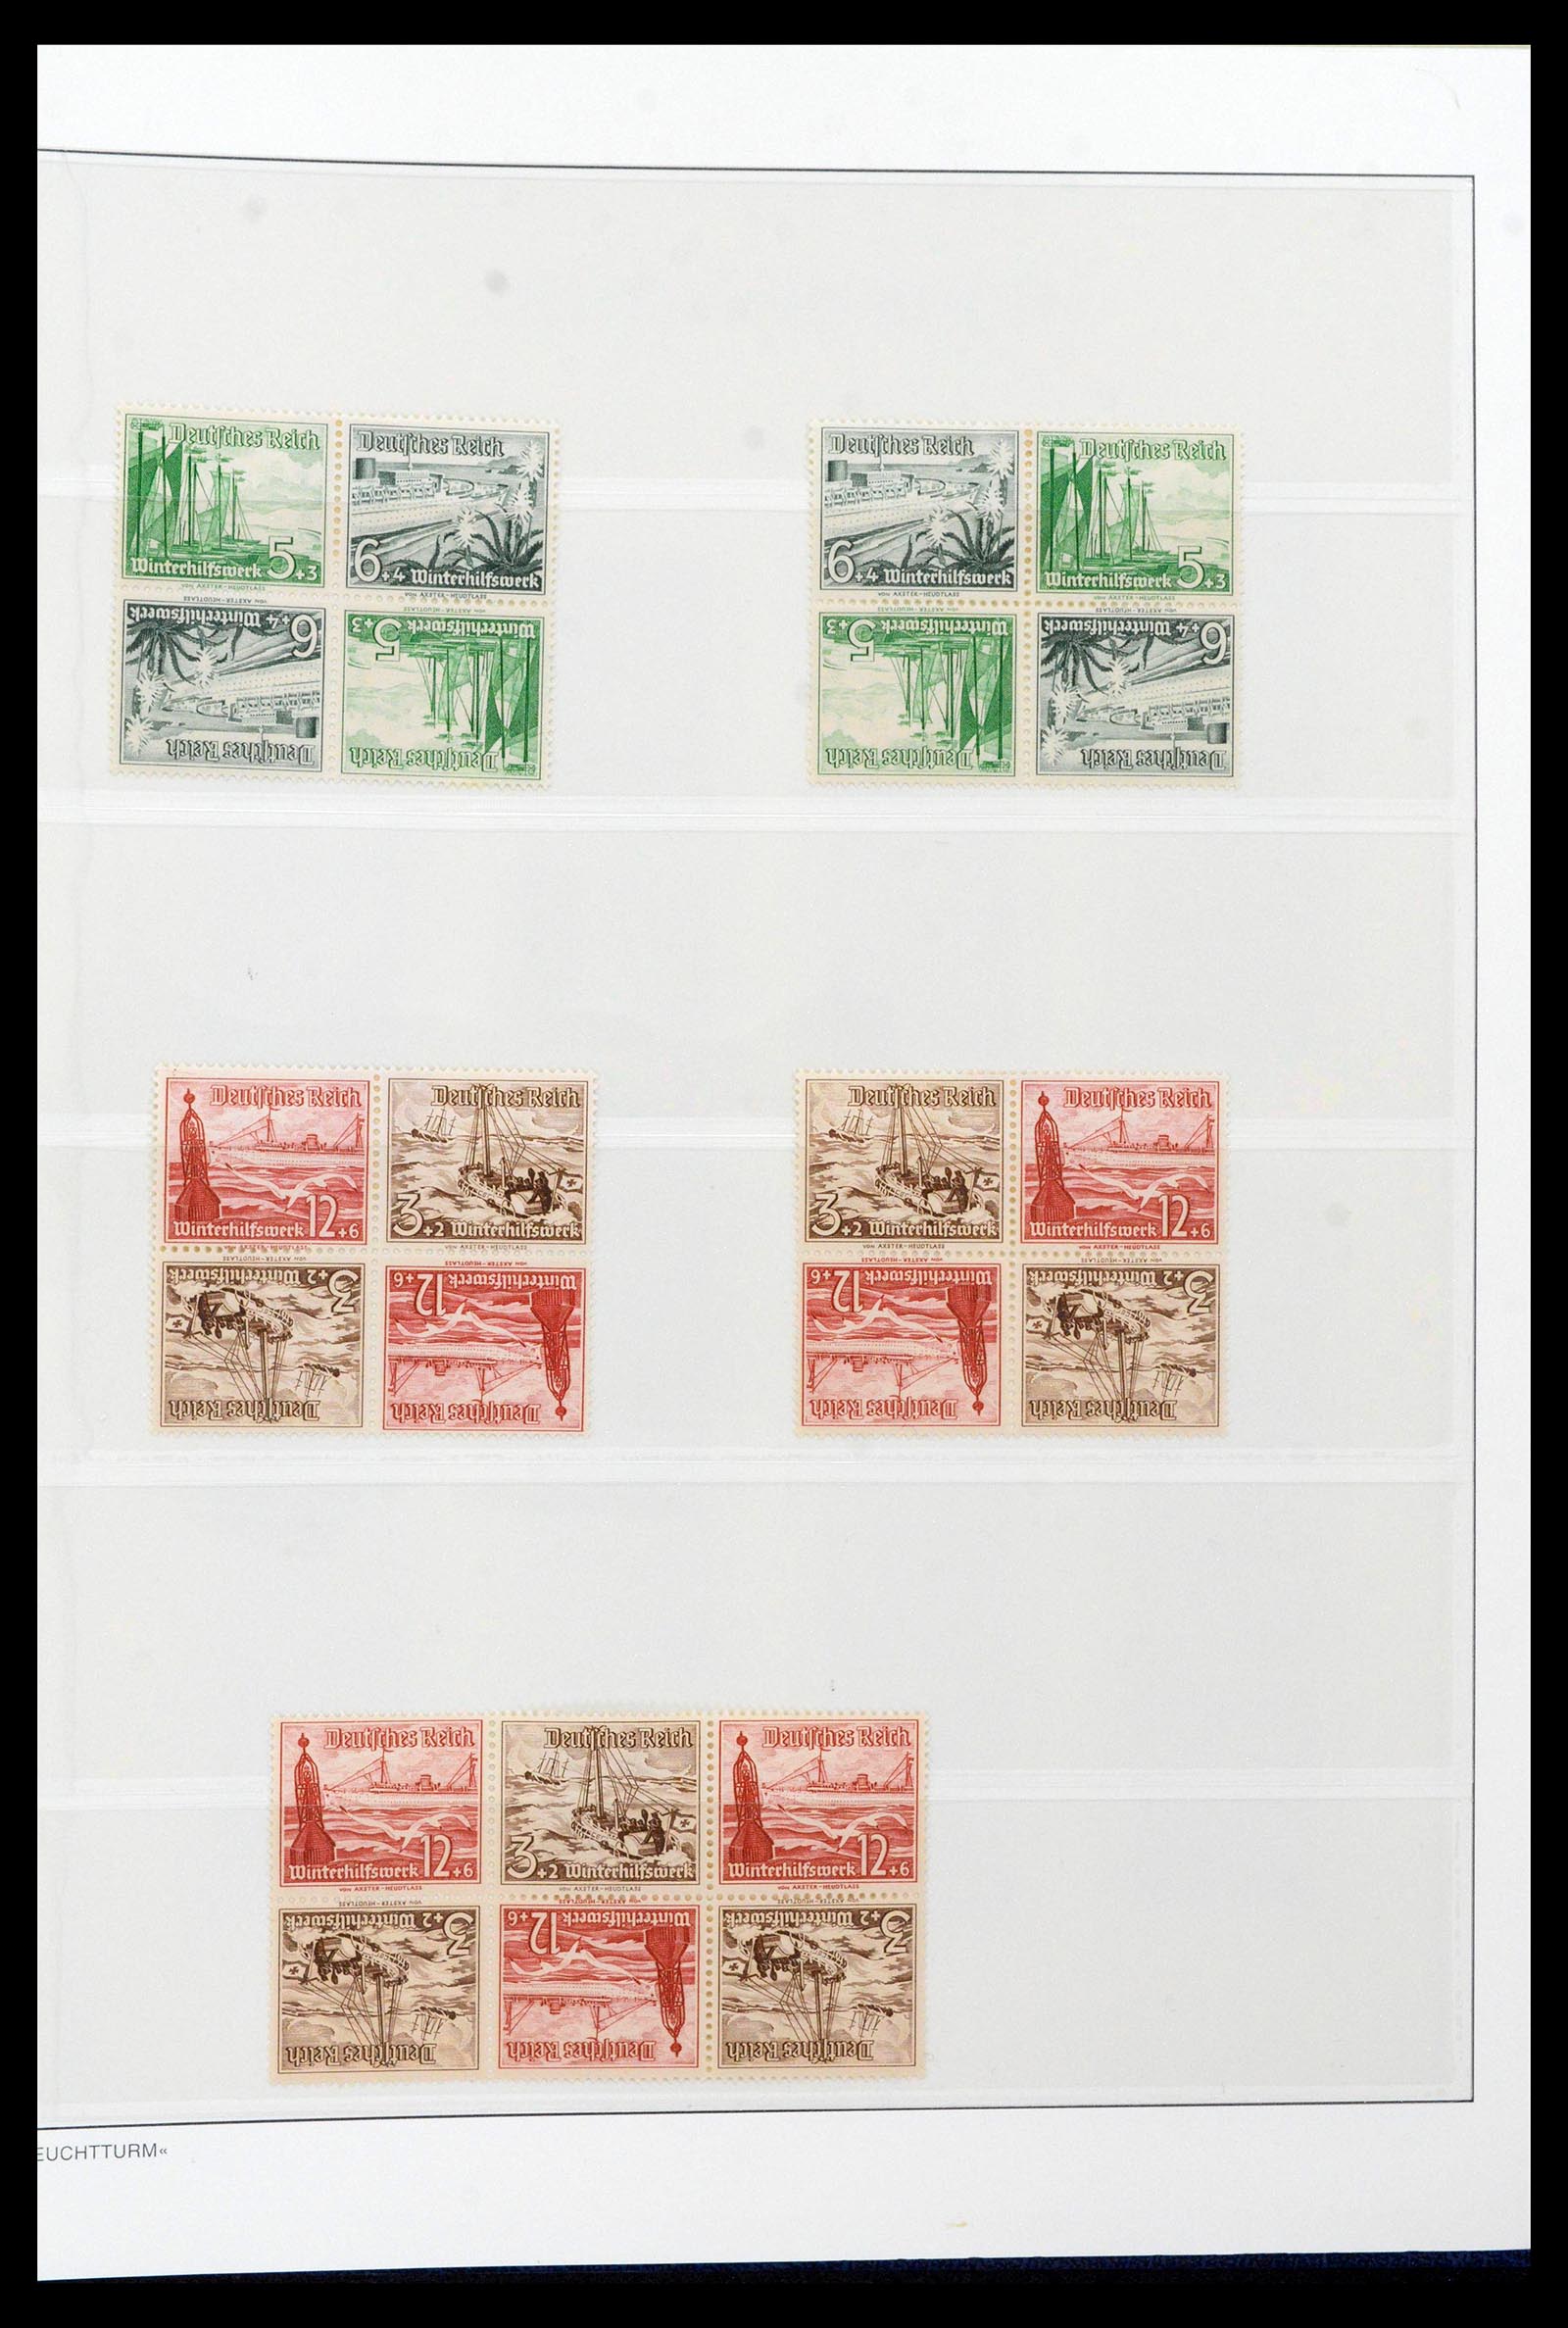 39045 0073 - Stamp collection 39045 German Reich combinations 1913-1941.